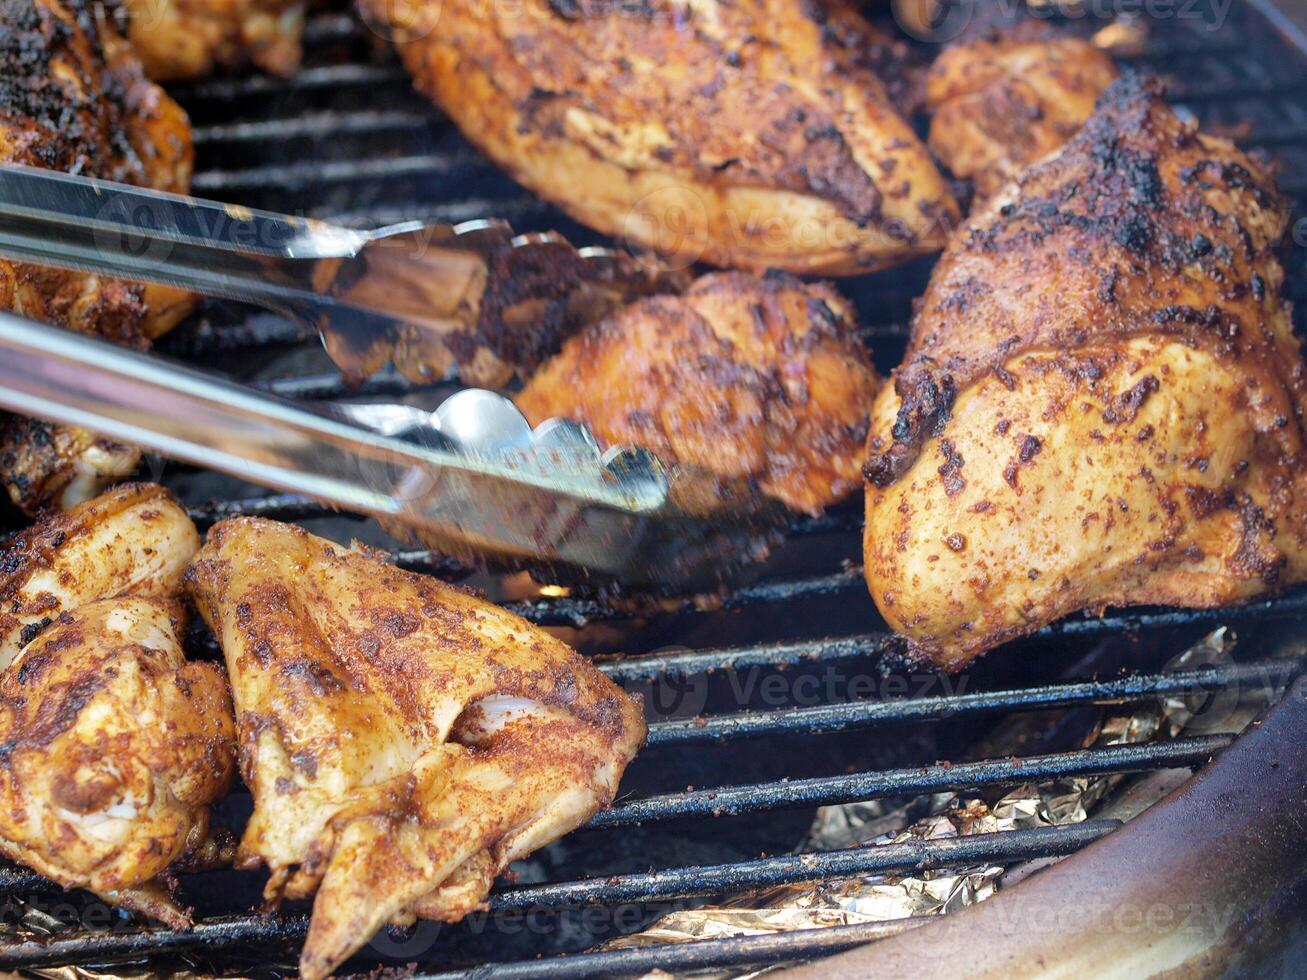 bar-b-que chicken on the grill with tongs photo